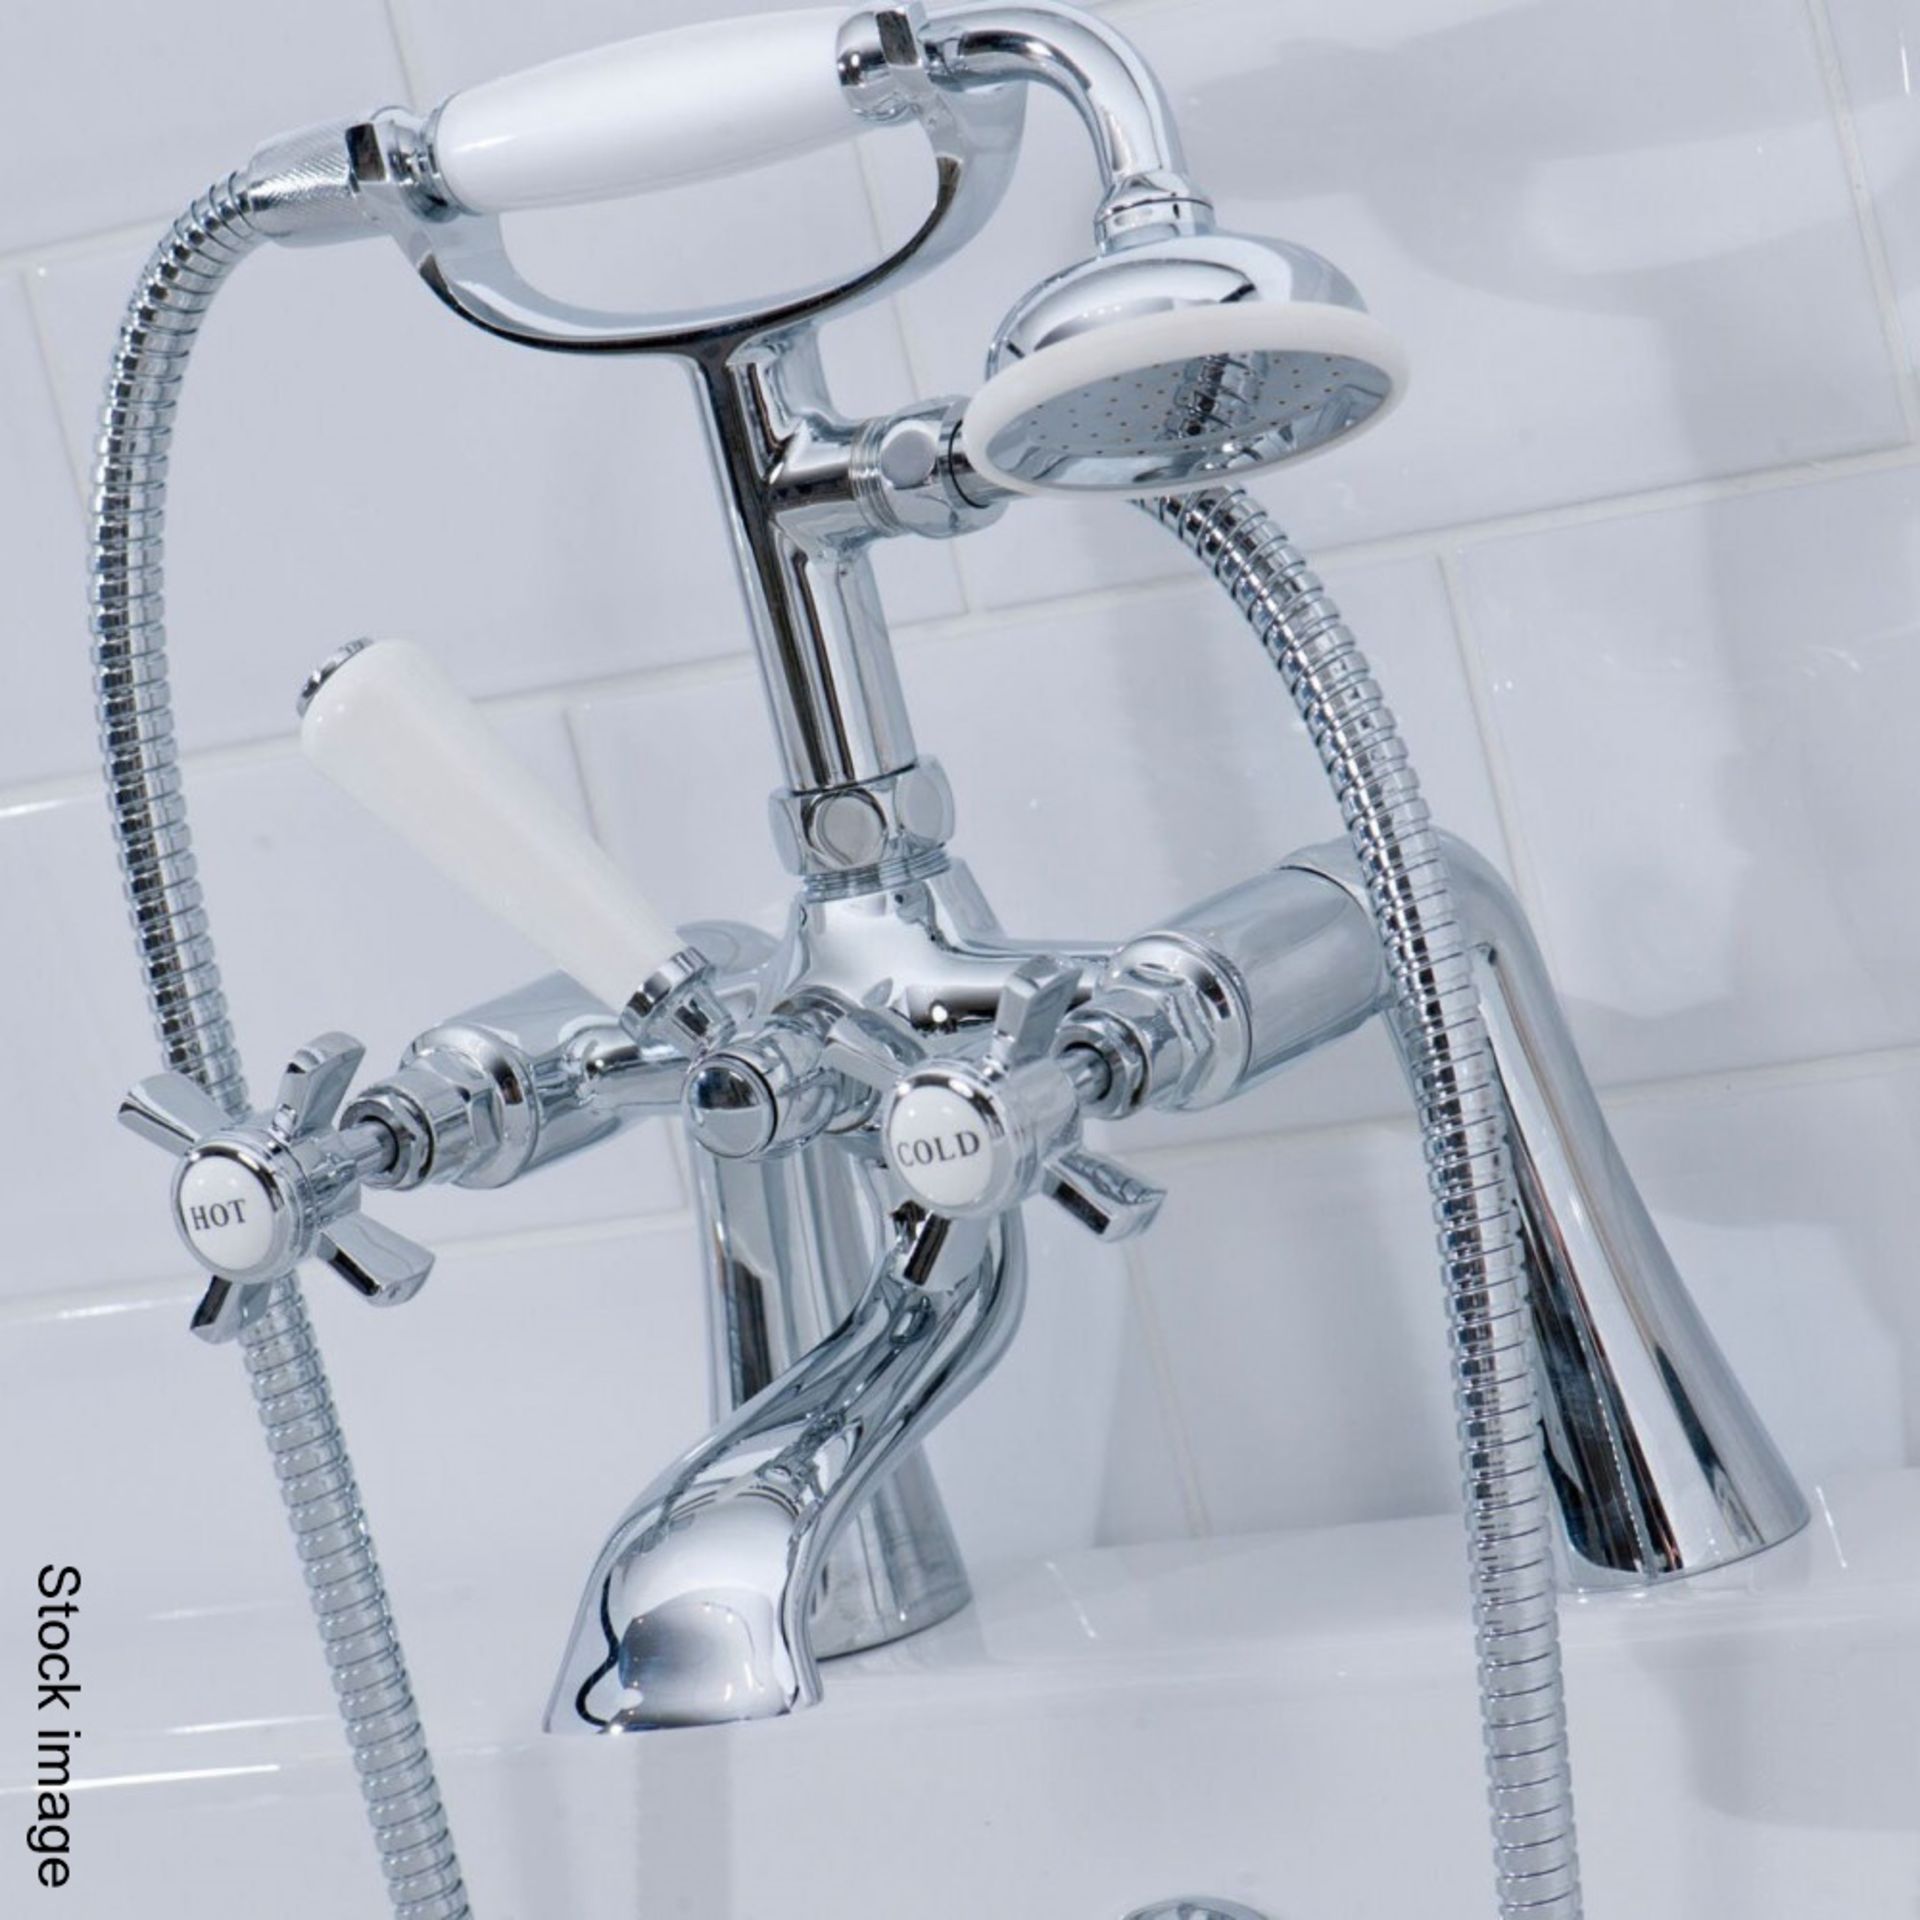 1 x CASSELLIE 'Time' Traditional Bath Mixer Tap With Shower Hose - Ref: TIM002 - New & Boxed Stock - - Image 2 of 2